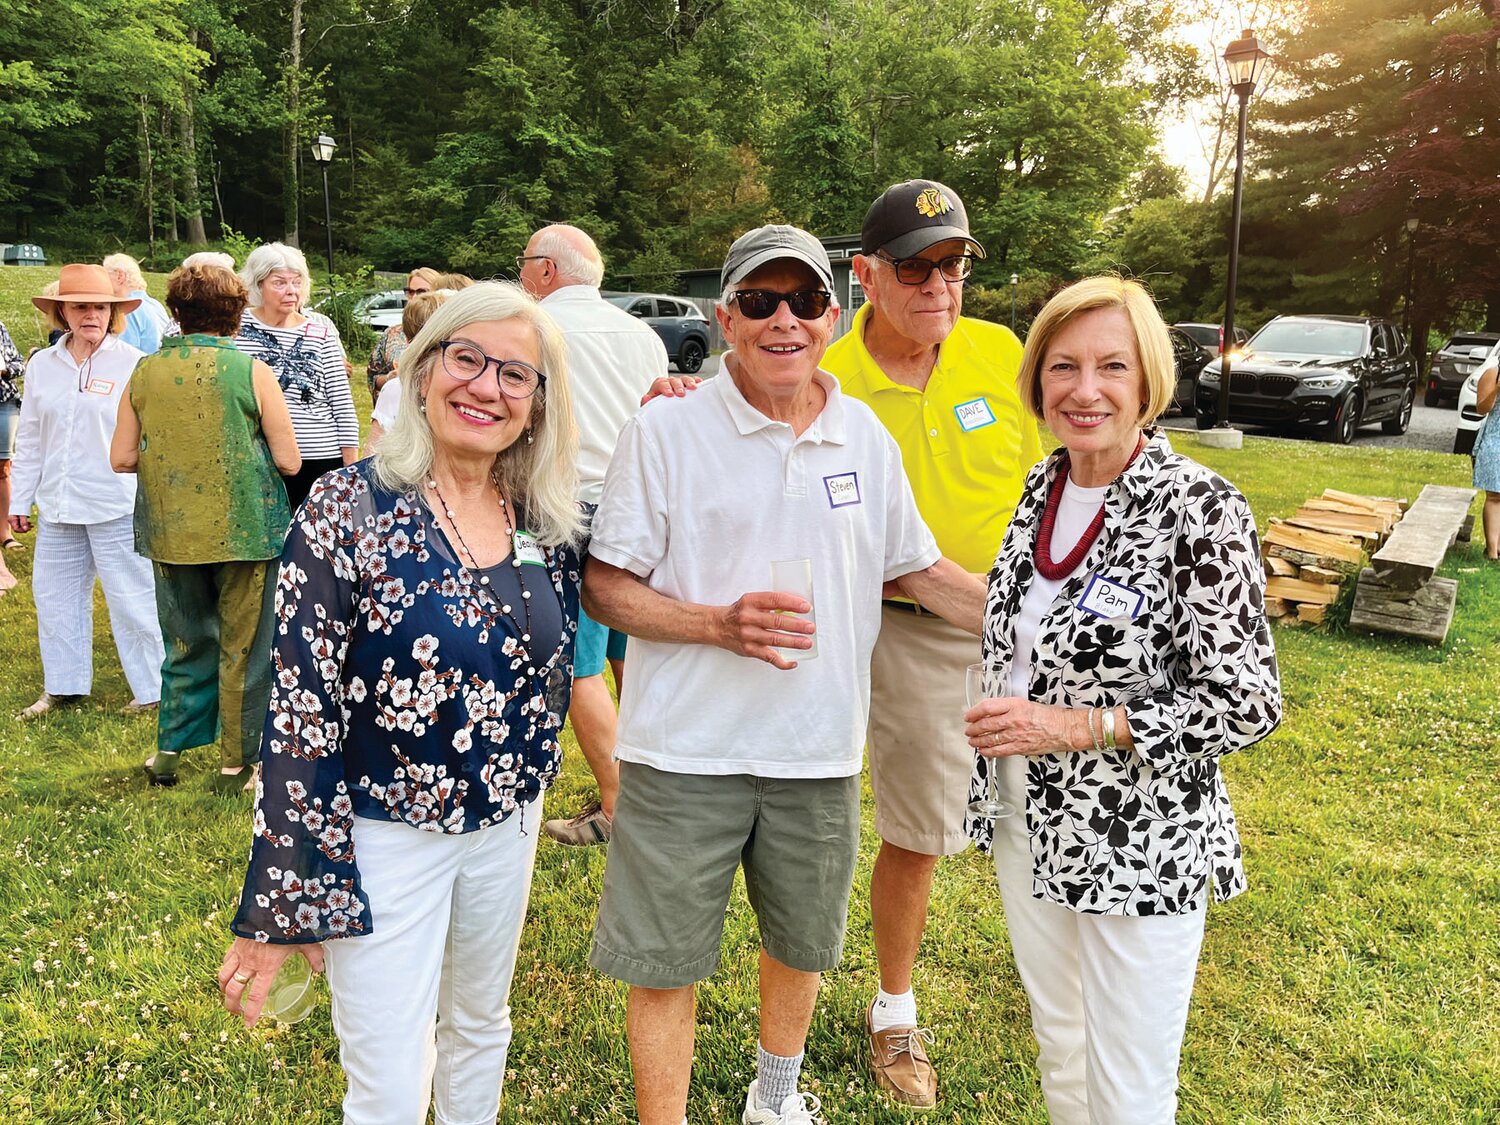 Members of the Lumberville community mingle at the annual Founder’s Day Picnic.